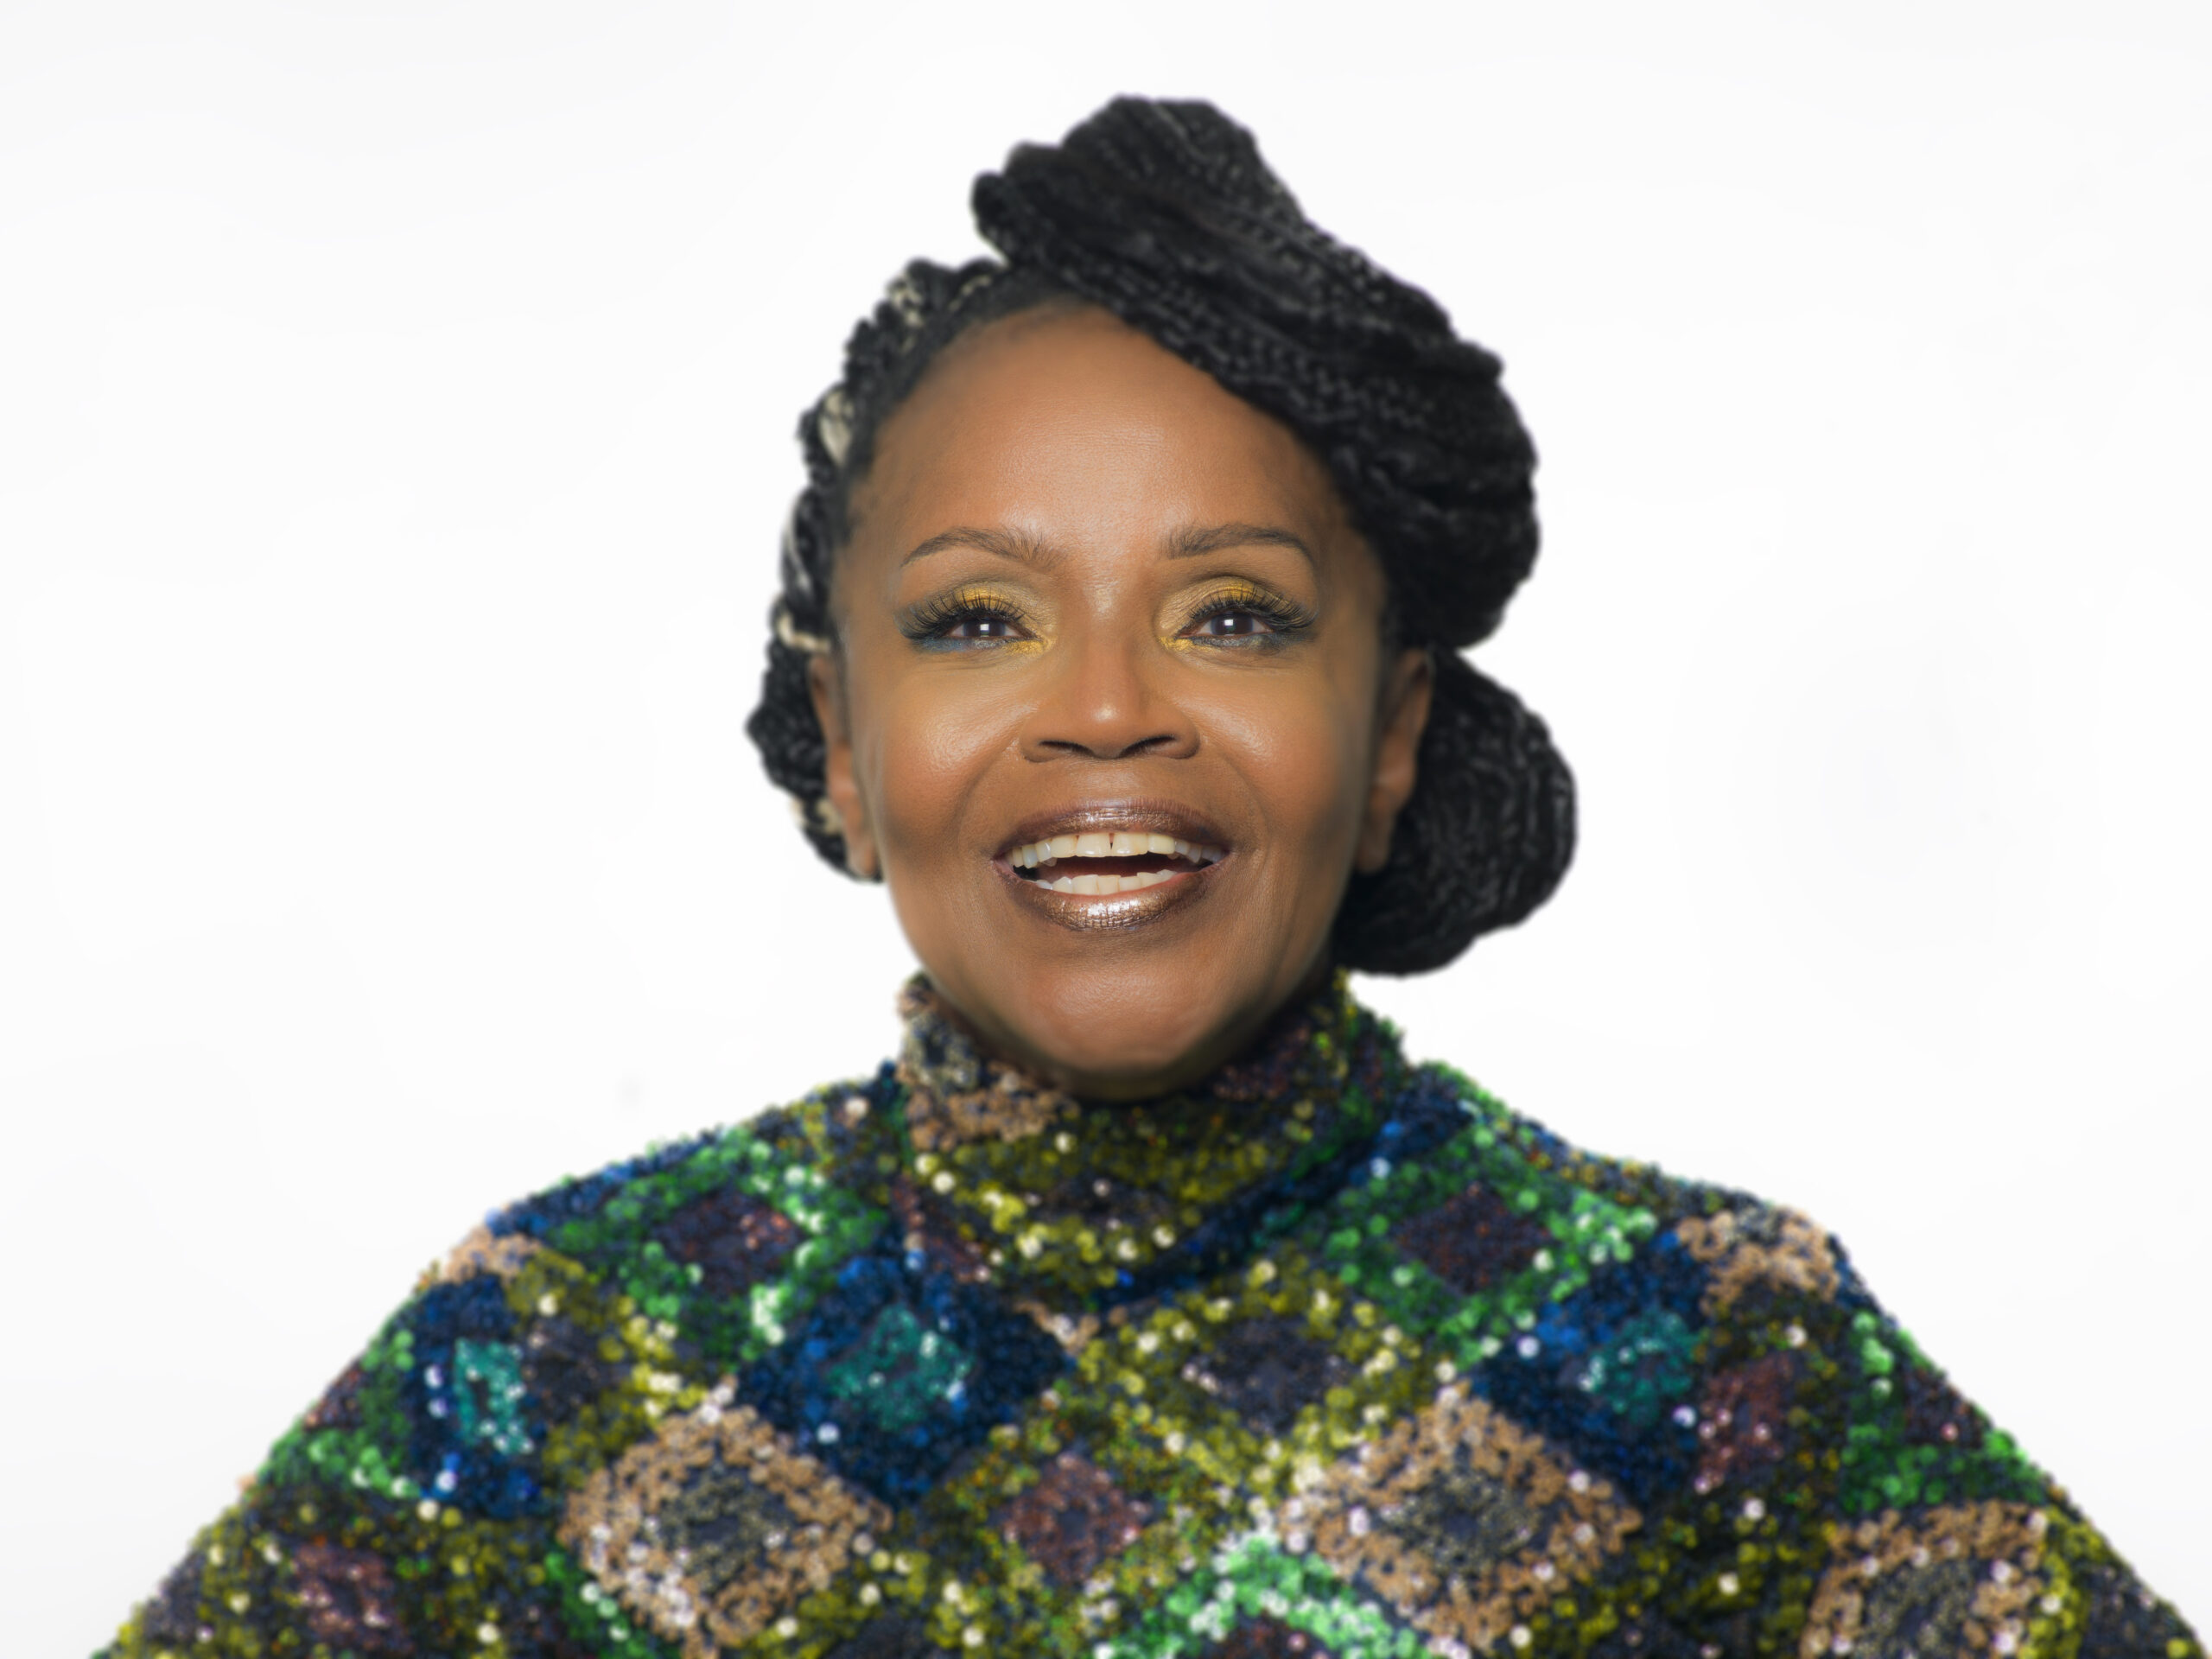 PP Arnold – Soul Survivor – An Intimate Evening of Music and Conversation